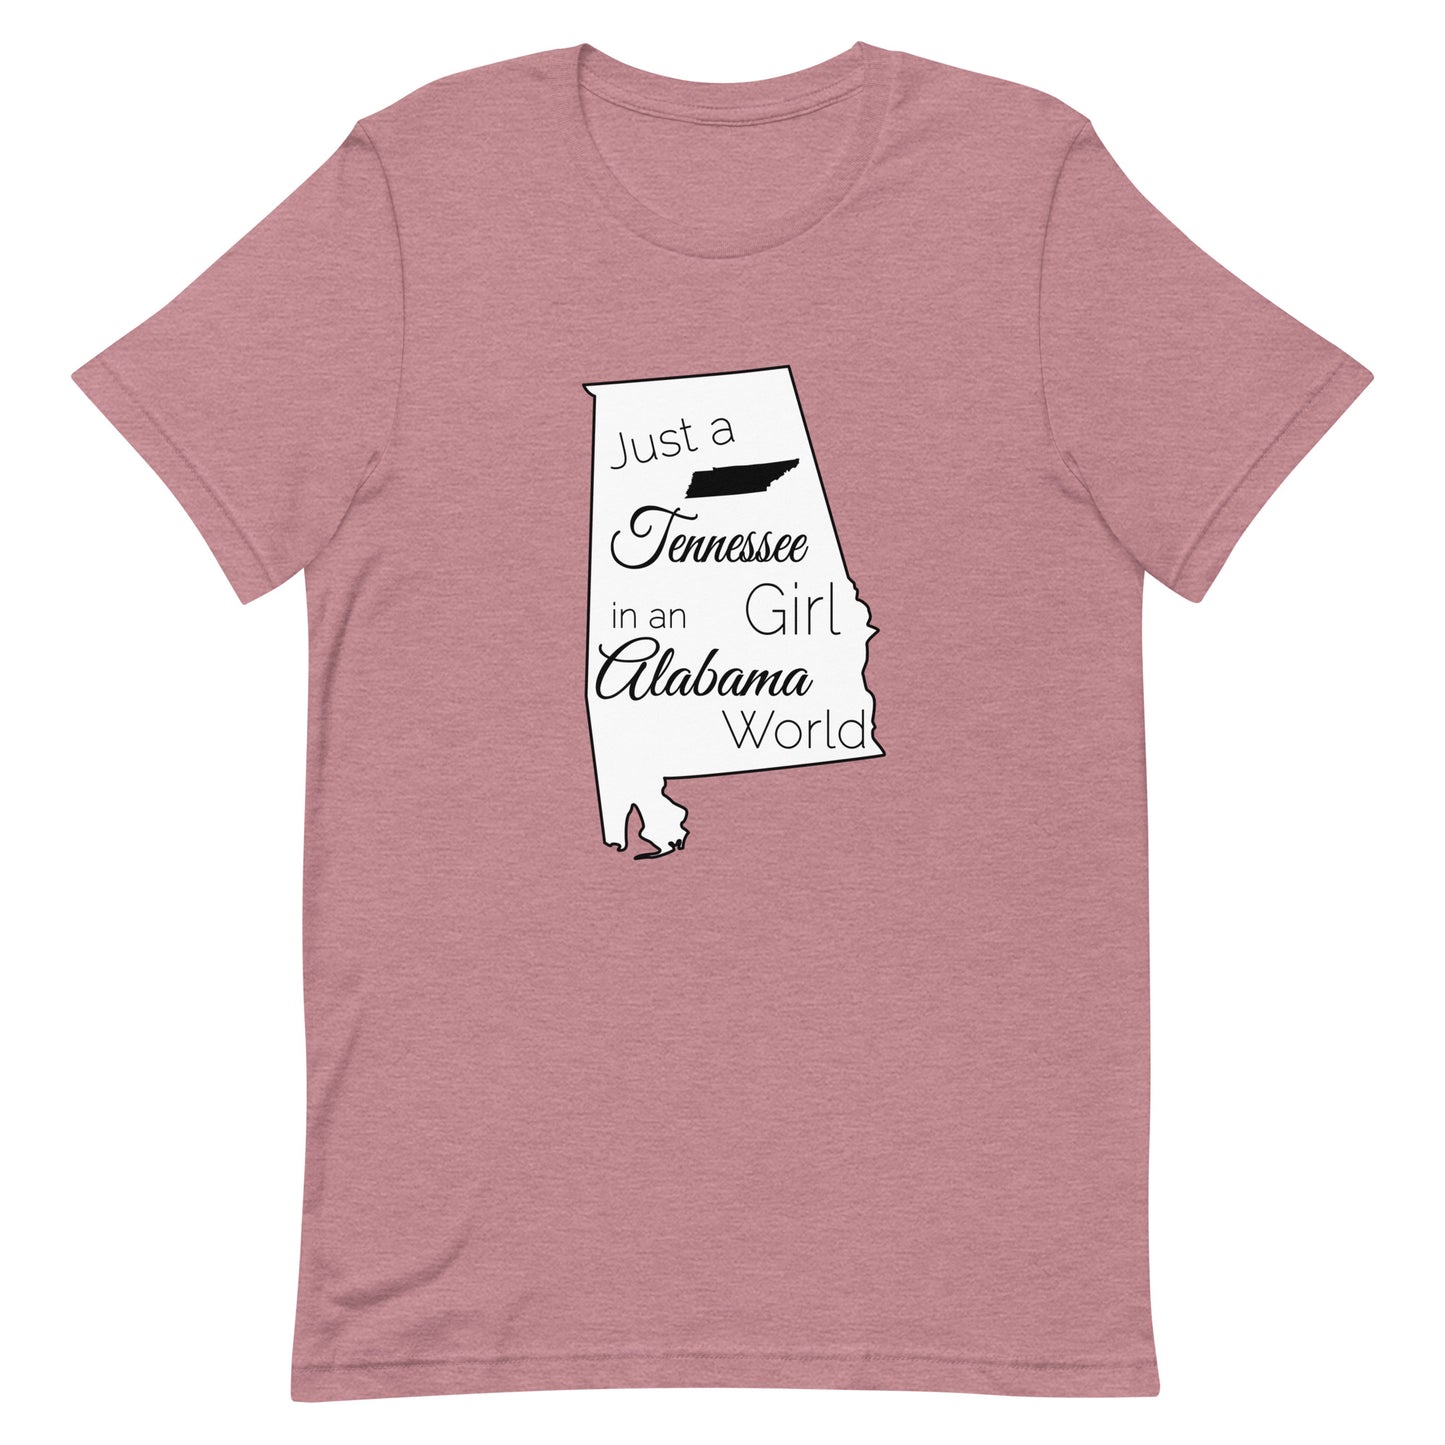 Just a Tennessee Girl in an Alabama World Unisex t-shirt